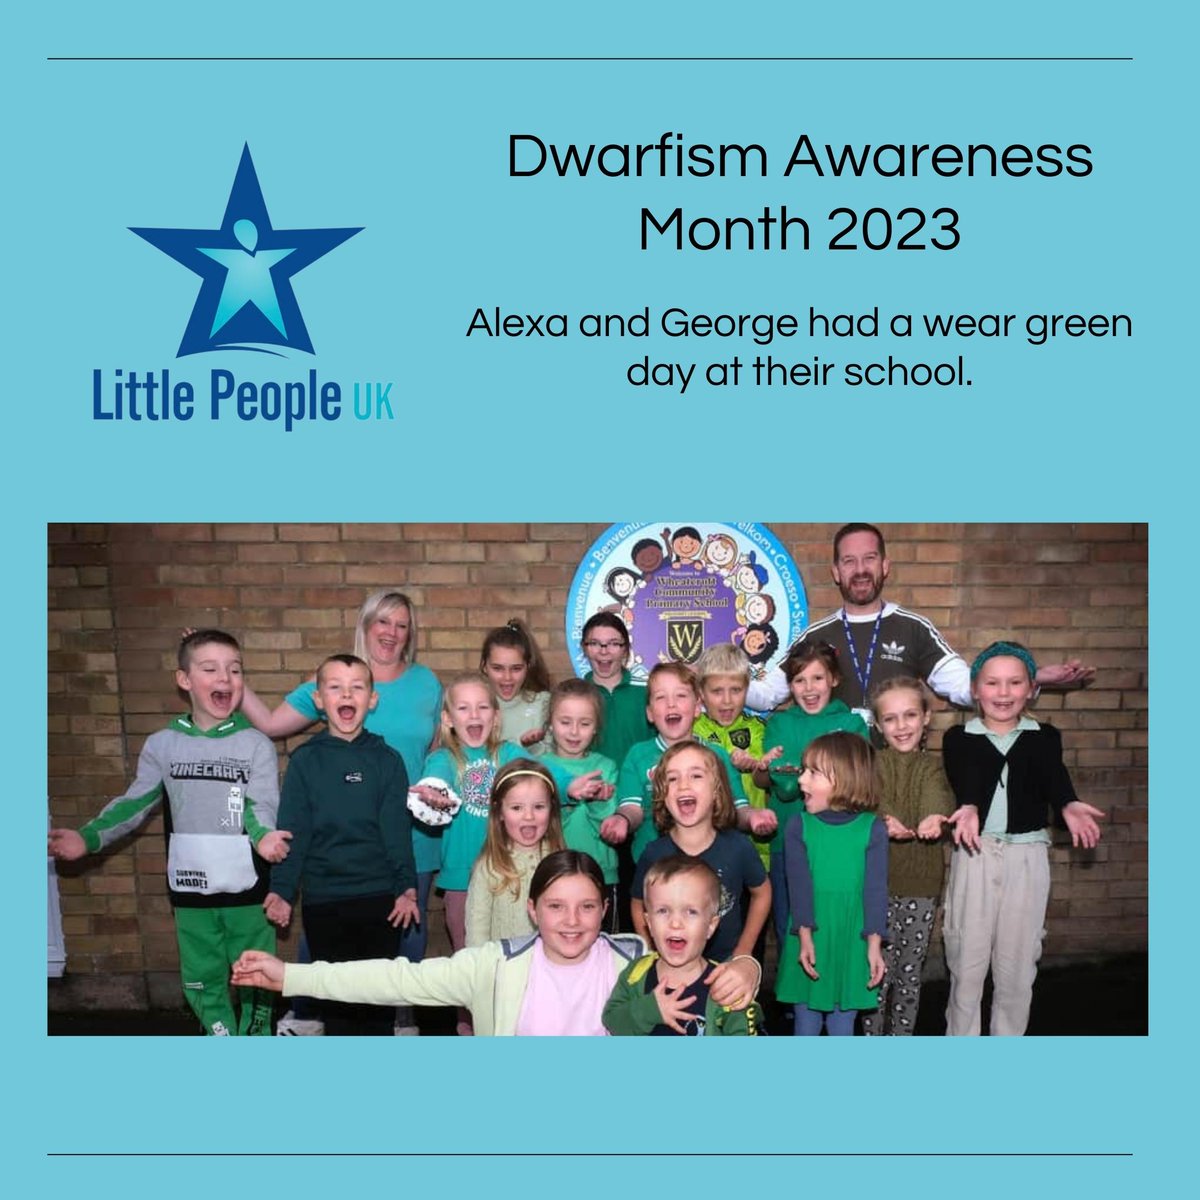 #MembersMonday

Alexa and George held a wear green day for #DwarfismAwarenessMonth!

Link - thescarboroughnews.co.uk/news/people/sc…